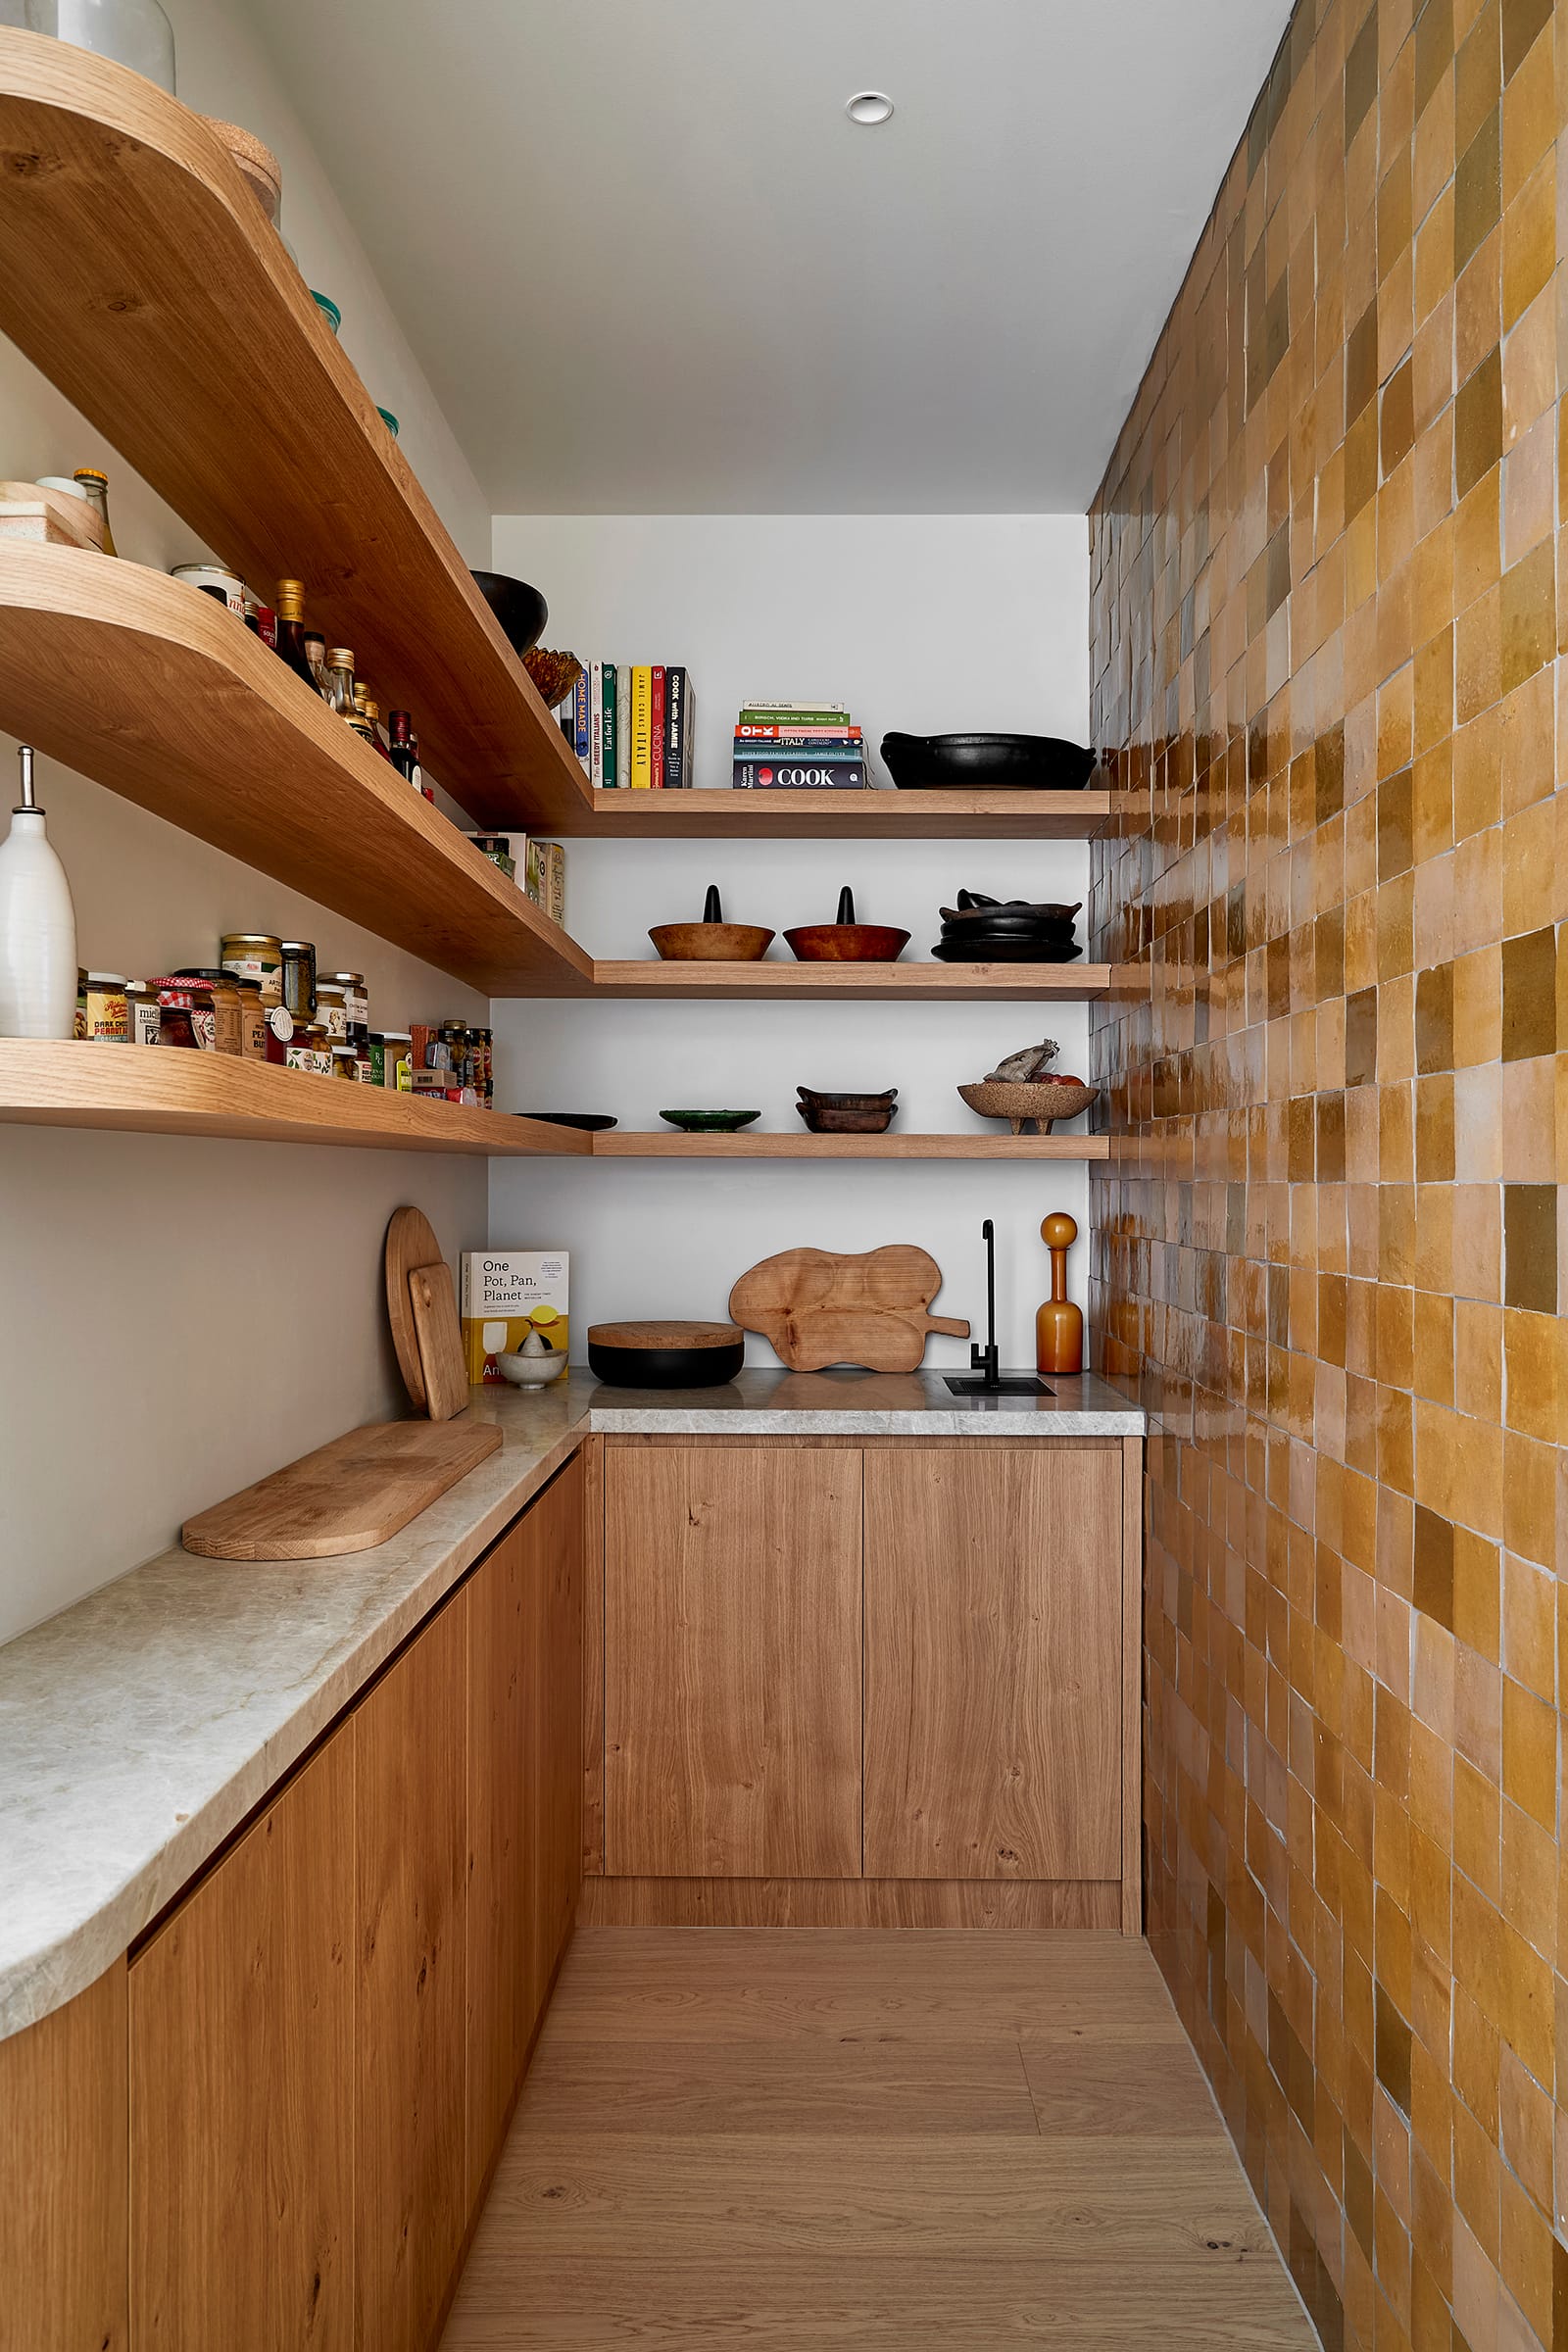 Fabrica by mcmahon and nerlich. Photography by Shannon McGrath. Scullery kitchen with timber cabinetry and stone benchtop. Beige tiled wall. Timber floors and floating timber shelves.